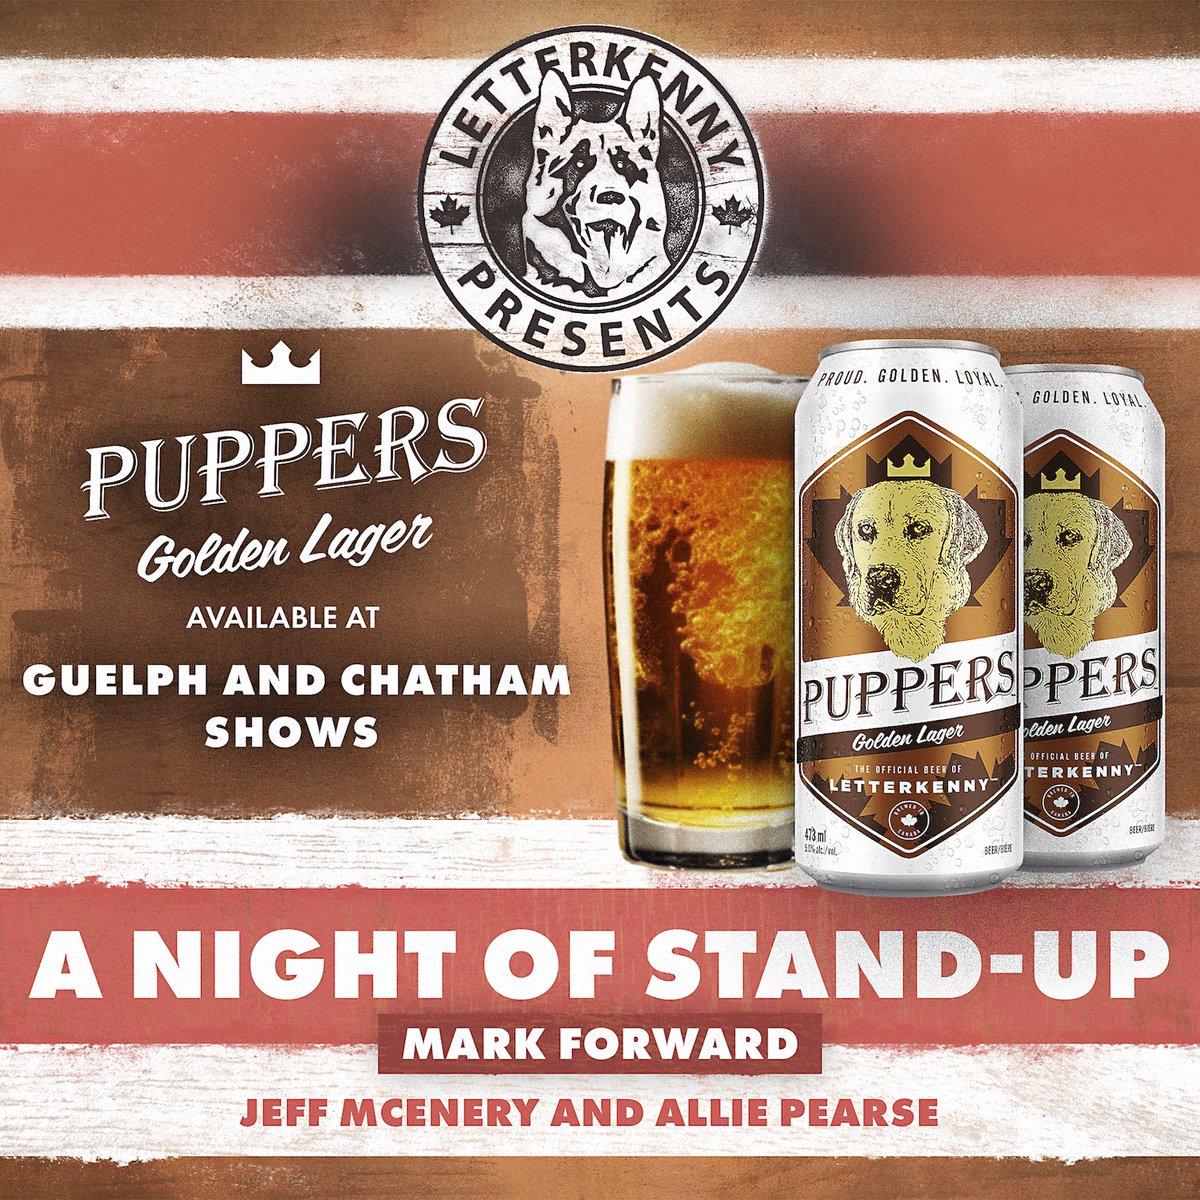 Heading to the Letterkenny Presents: A Night of Stand-Up tour in Guelph or Chatham next week? Puppers will be available to enjoy during the show. Hope to see you there! Don't have tickets yet? Grab them now at letterkenny.tv/live